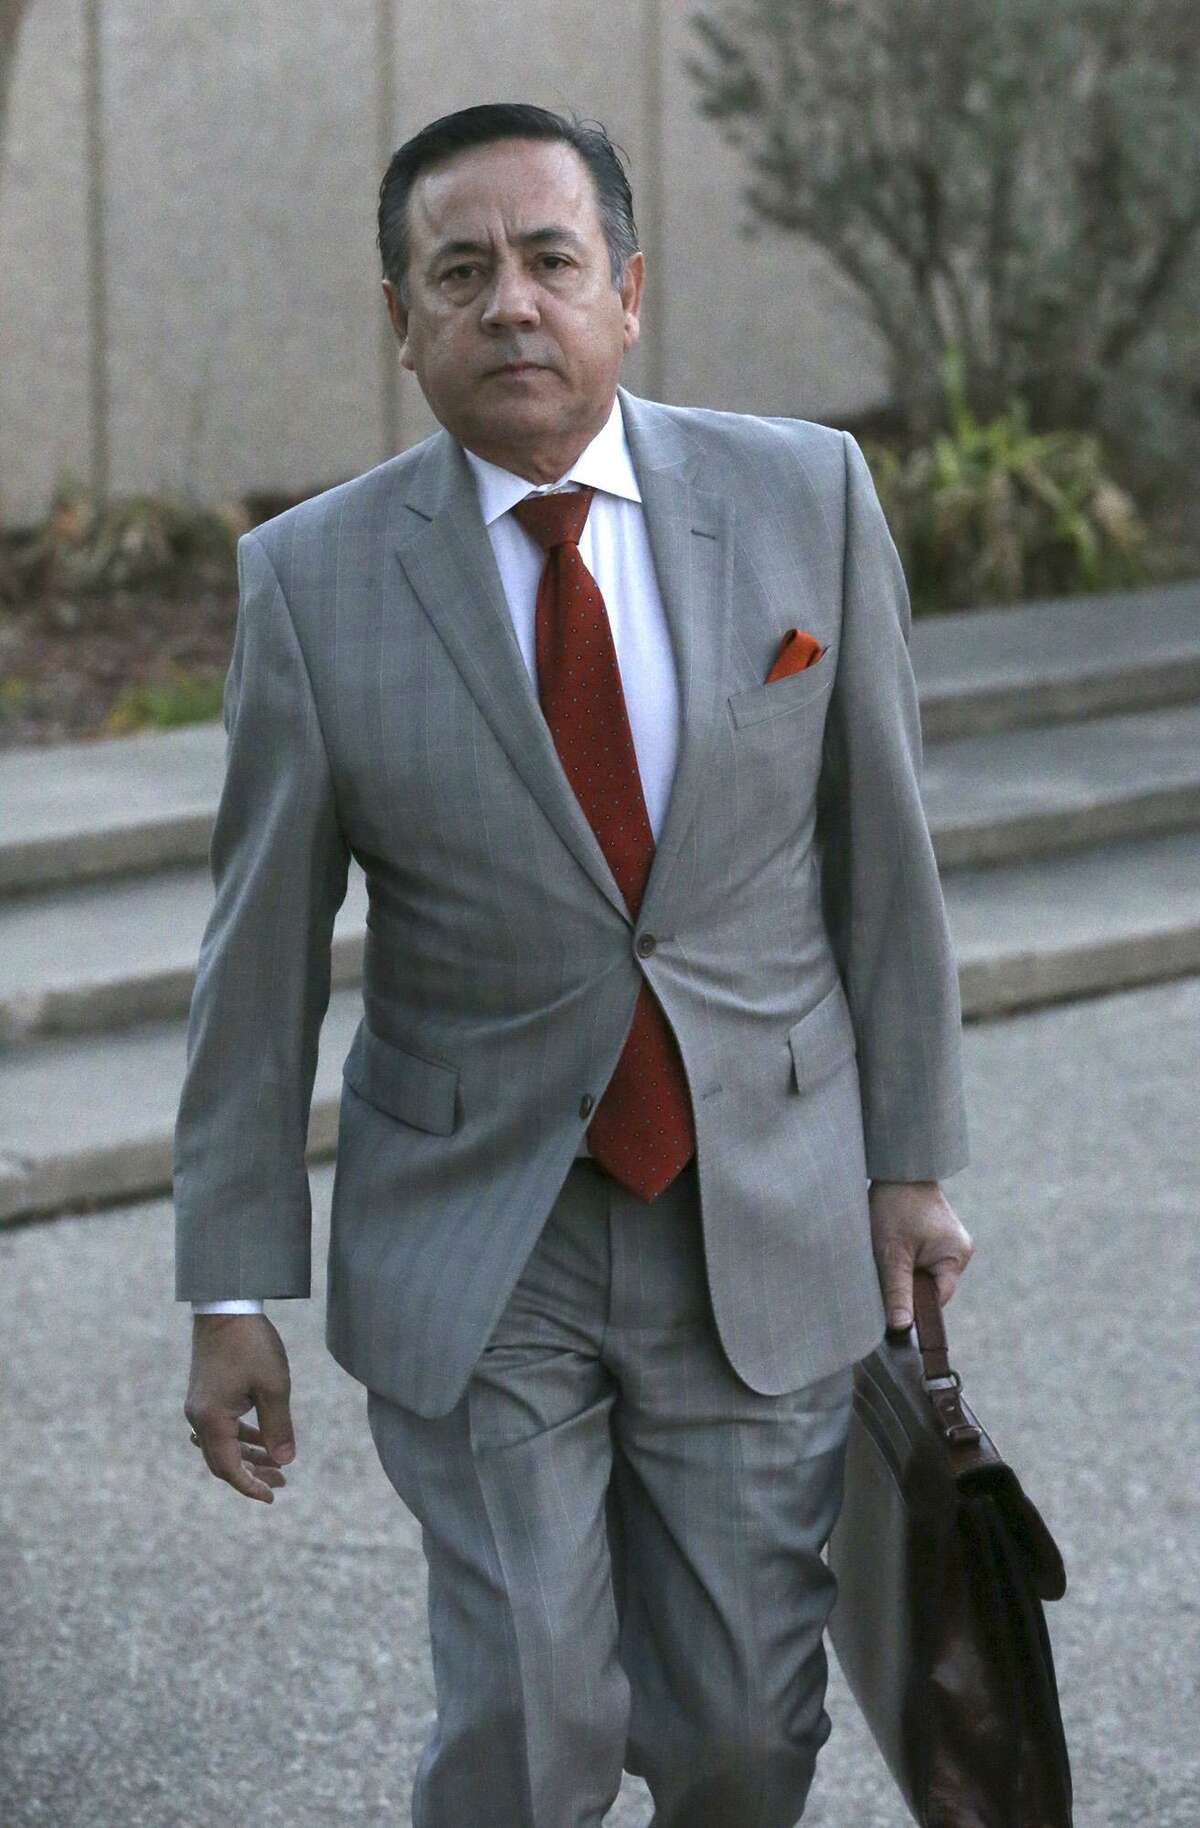 State Senator Carlos Uresti’s next criminal trial has been postponed until Oct. 22. He was found guilty by a federal jury last month on 11 felony charges in a separate case.